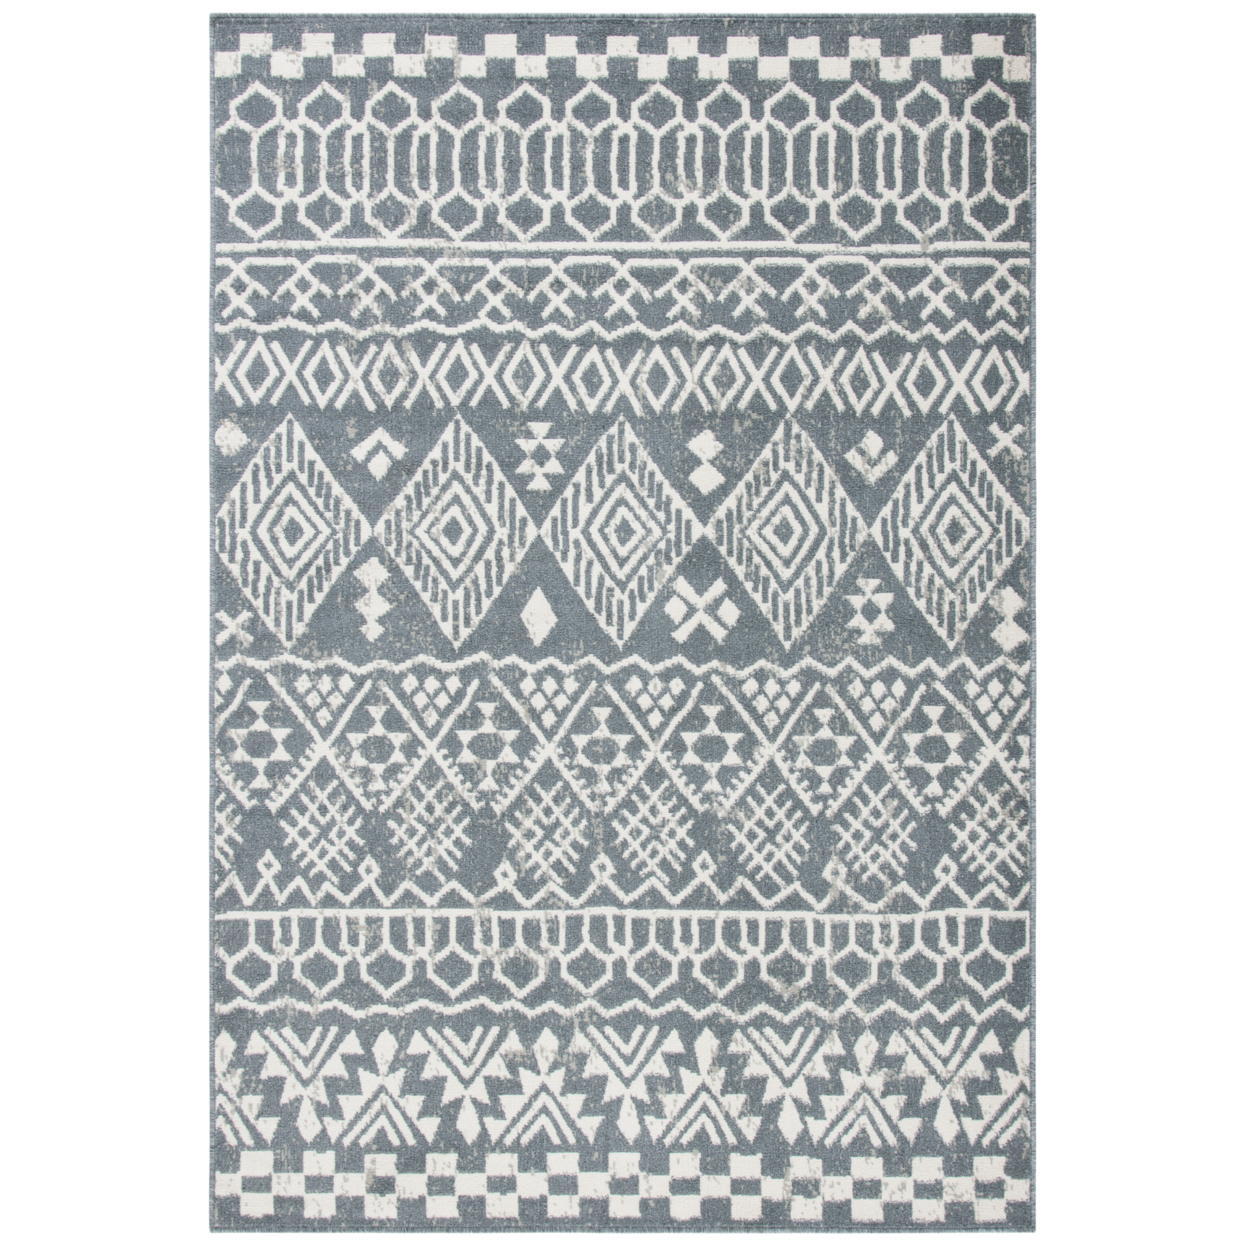 SAFAVIEH Pyramid Collection PYR205A Ivory / Charcoal Rug - 8 X 10